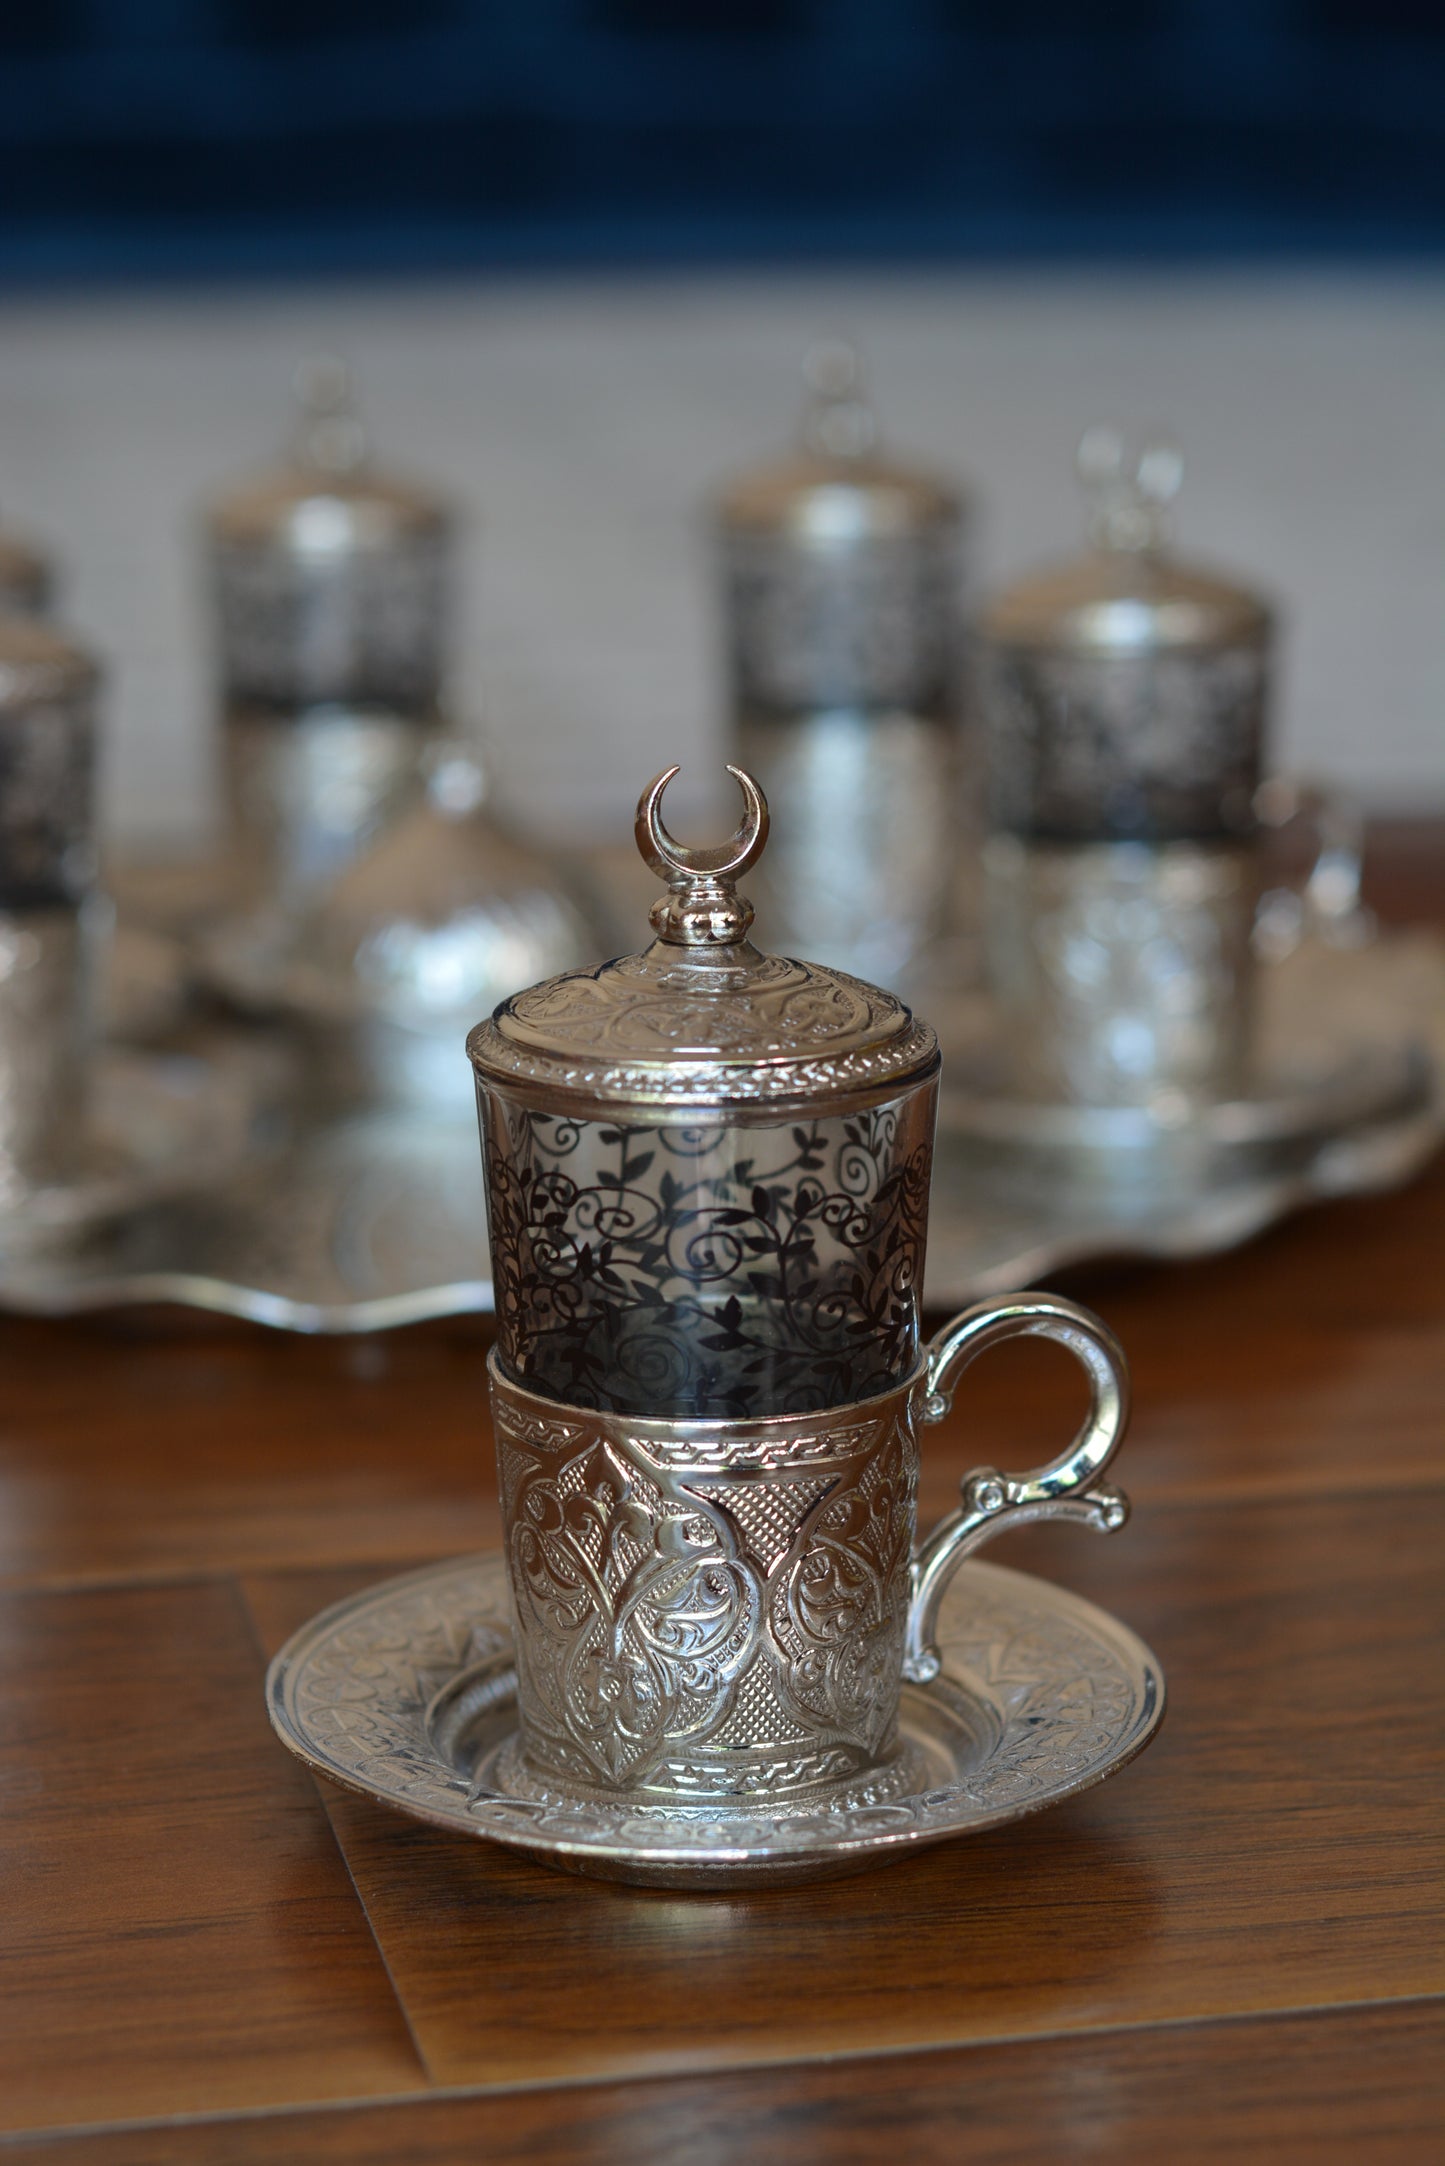 Premium Silver Turkish Tea Cups with Tops- Serves 6